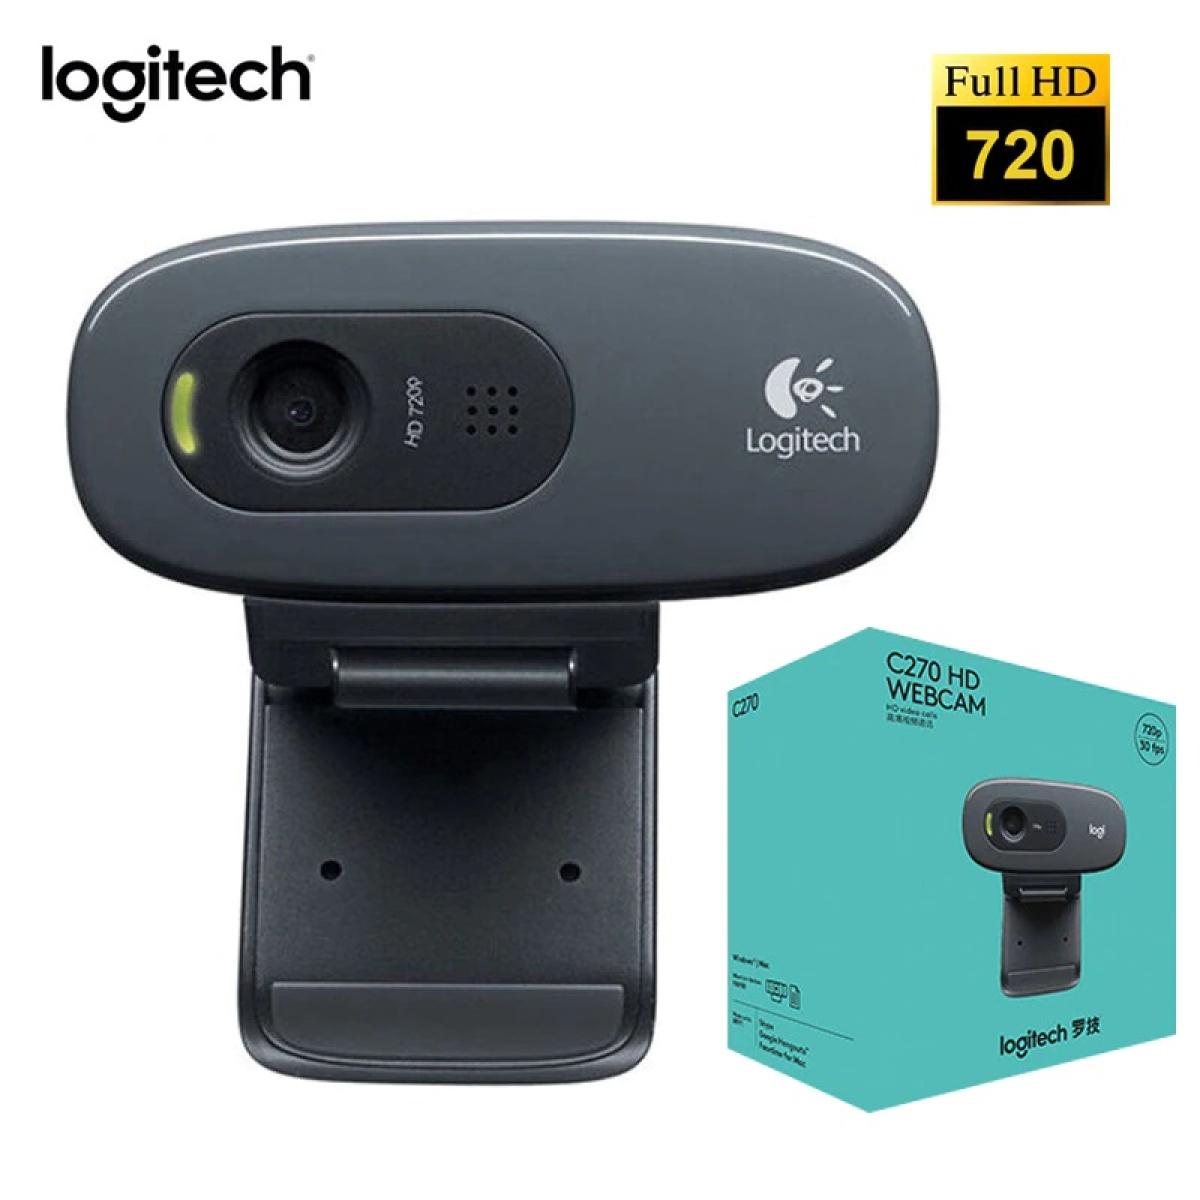 Logitech C270 HD Webcam with Noise Reducing Mics for Video Calls